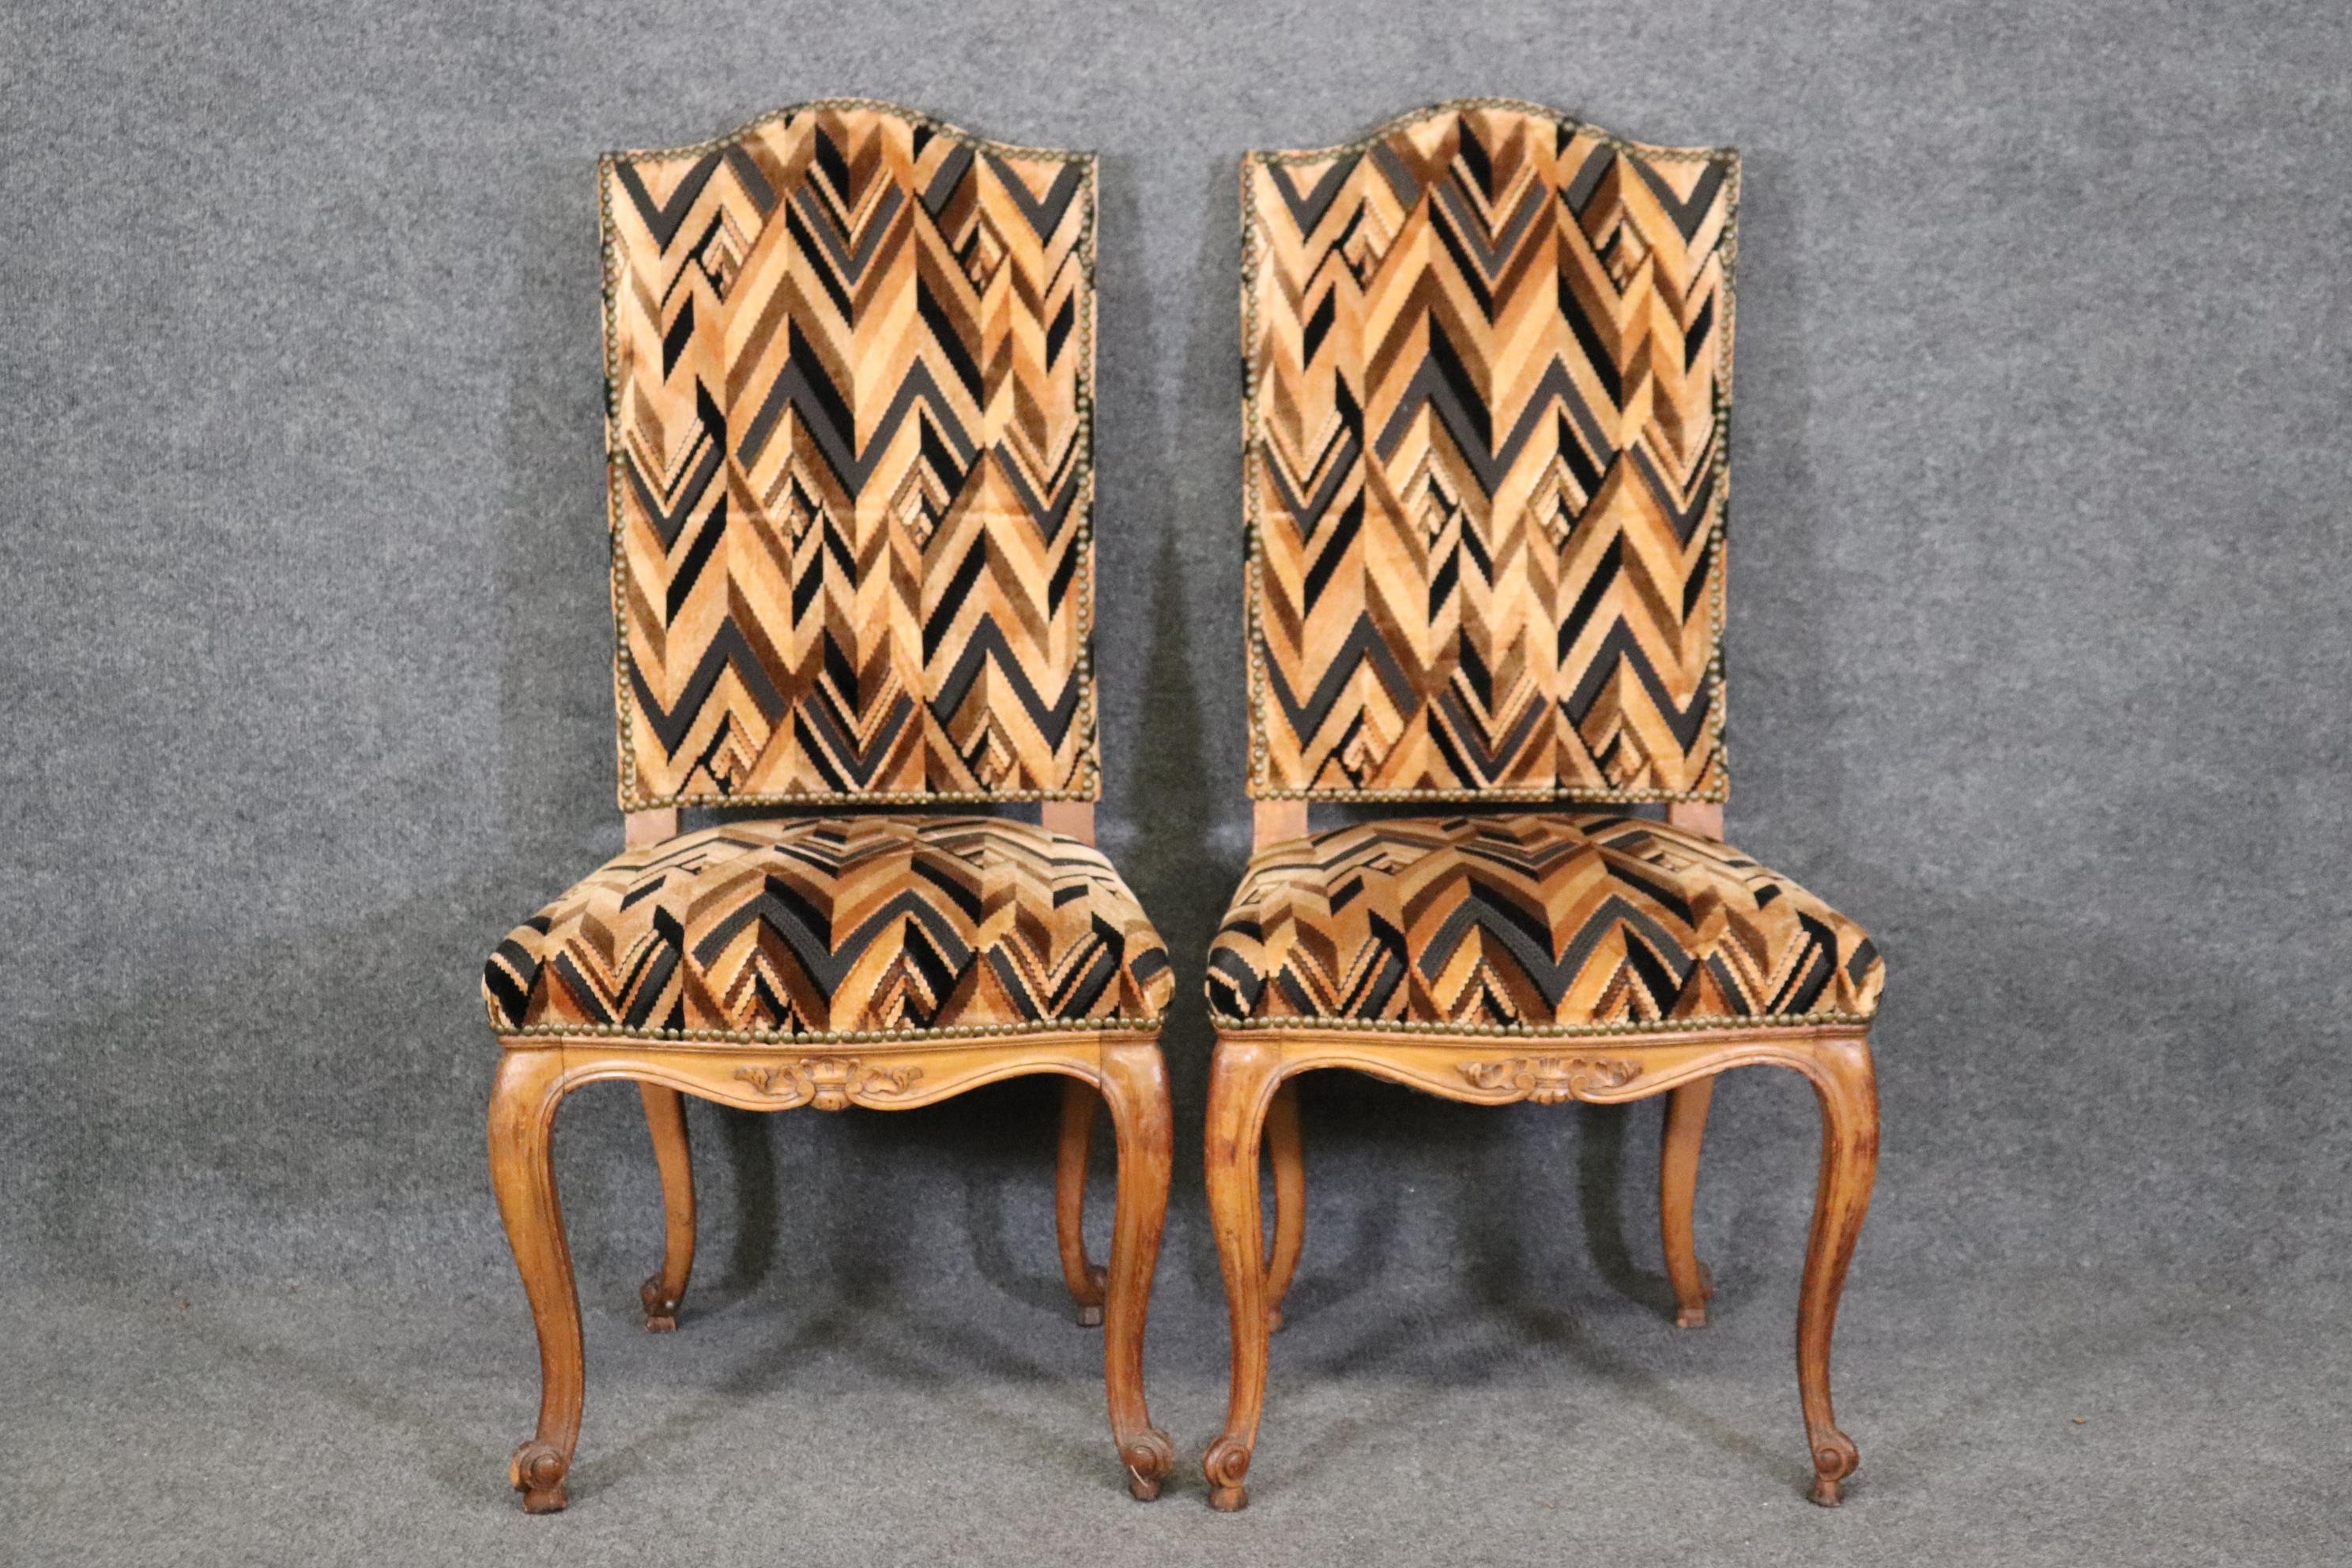 This is a beautiful pair of chairs in good condition. The chairs measure 42.75 tall x 21 wide x 22.5 deep and a seat height of 19 inches. The chairs are in nailhead trim and date to the 1920s era. 




We can help with shipping to the ground floor